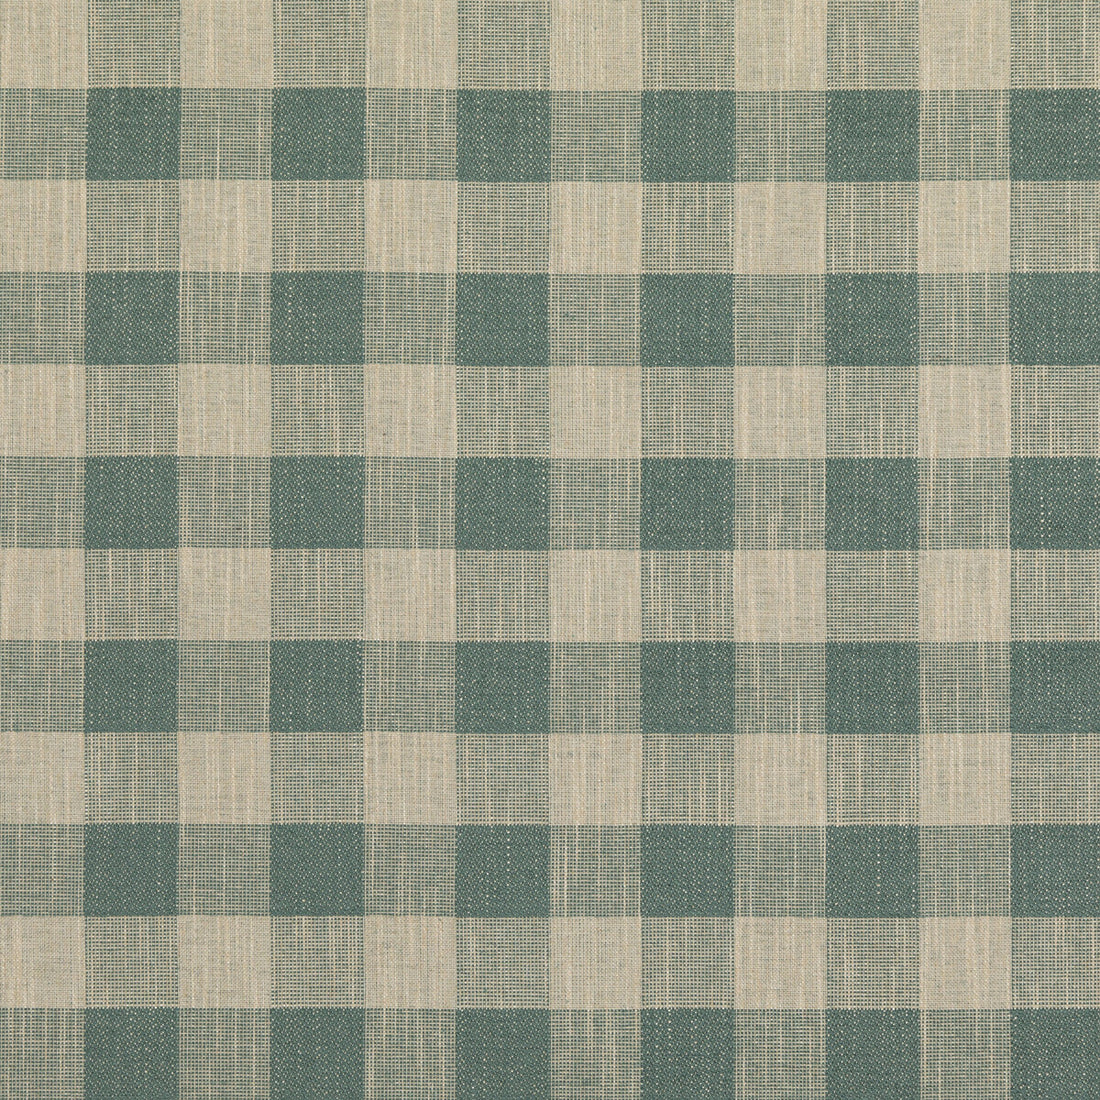 Block Check fabric in aqua color - pattern PF50490.725.0 - by Baker Lifestyle in the Block Weaves collection